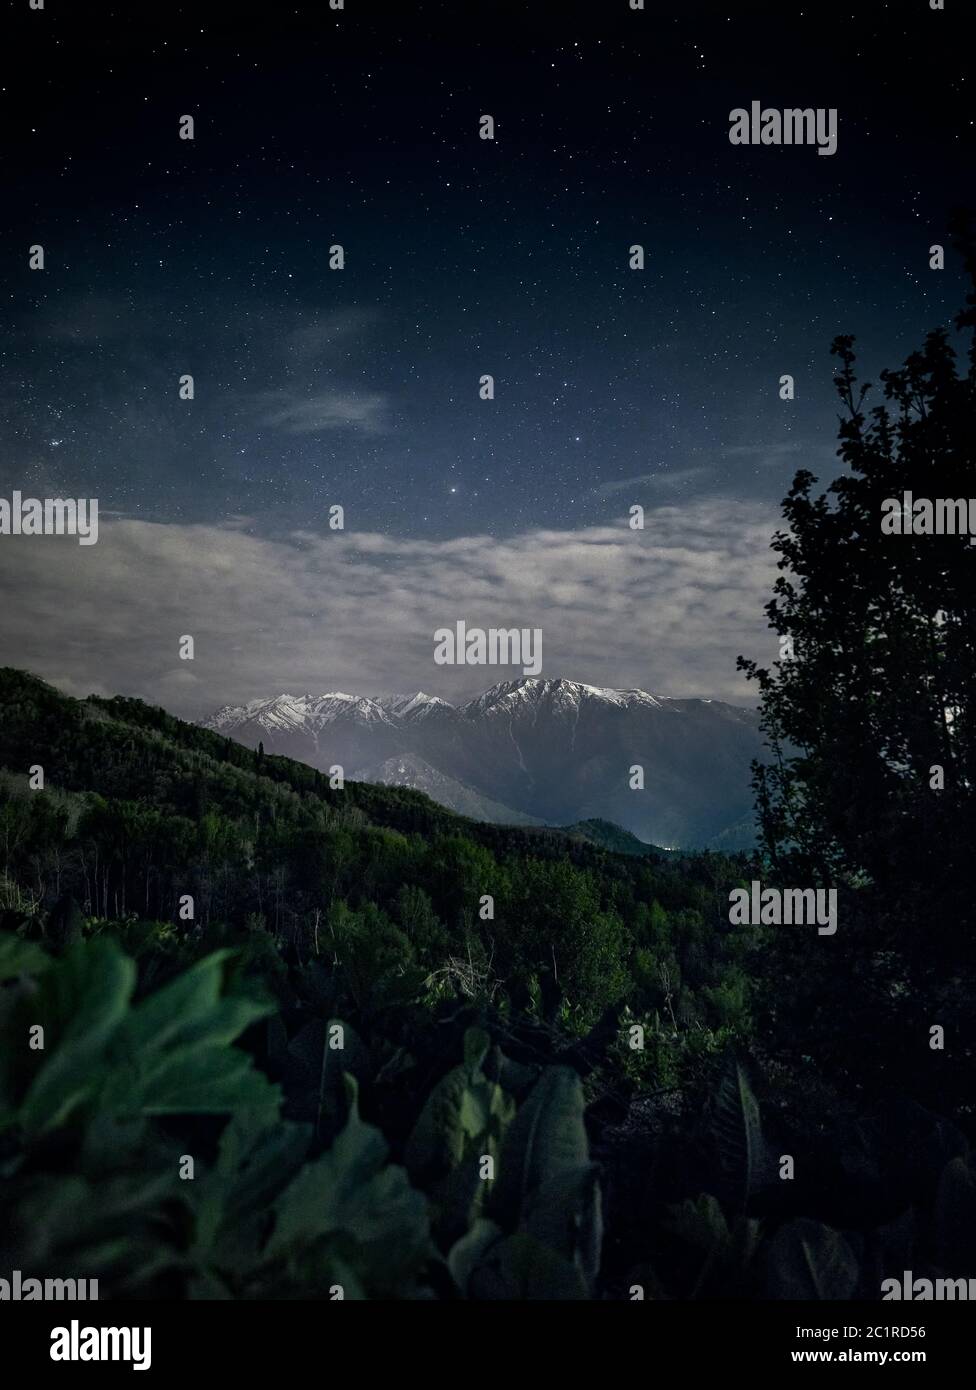 Beautiful scenery of white peak mountains and lush greenery at foreground against night sky full of stars. Astrophotography and long exposure. Stock Photo